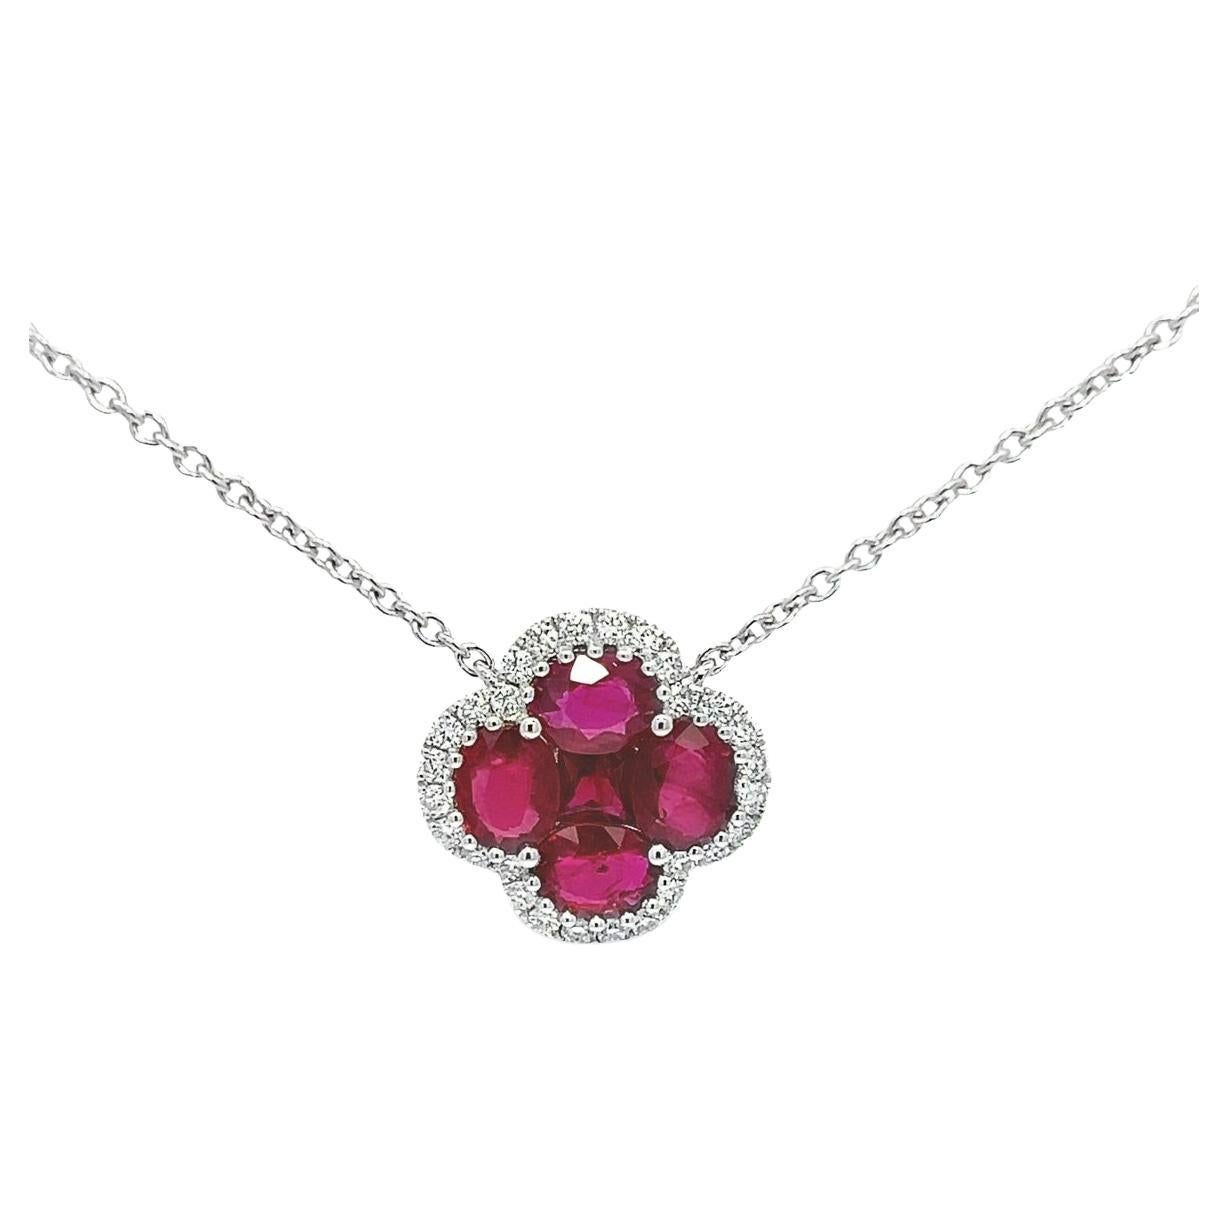 2.14CT Rubies Flower Necklace Diamonds, set in 18K White Gold For Sale